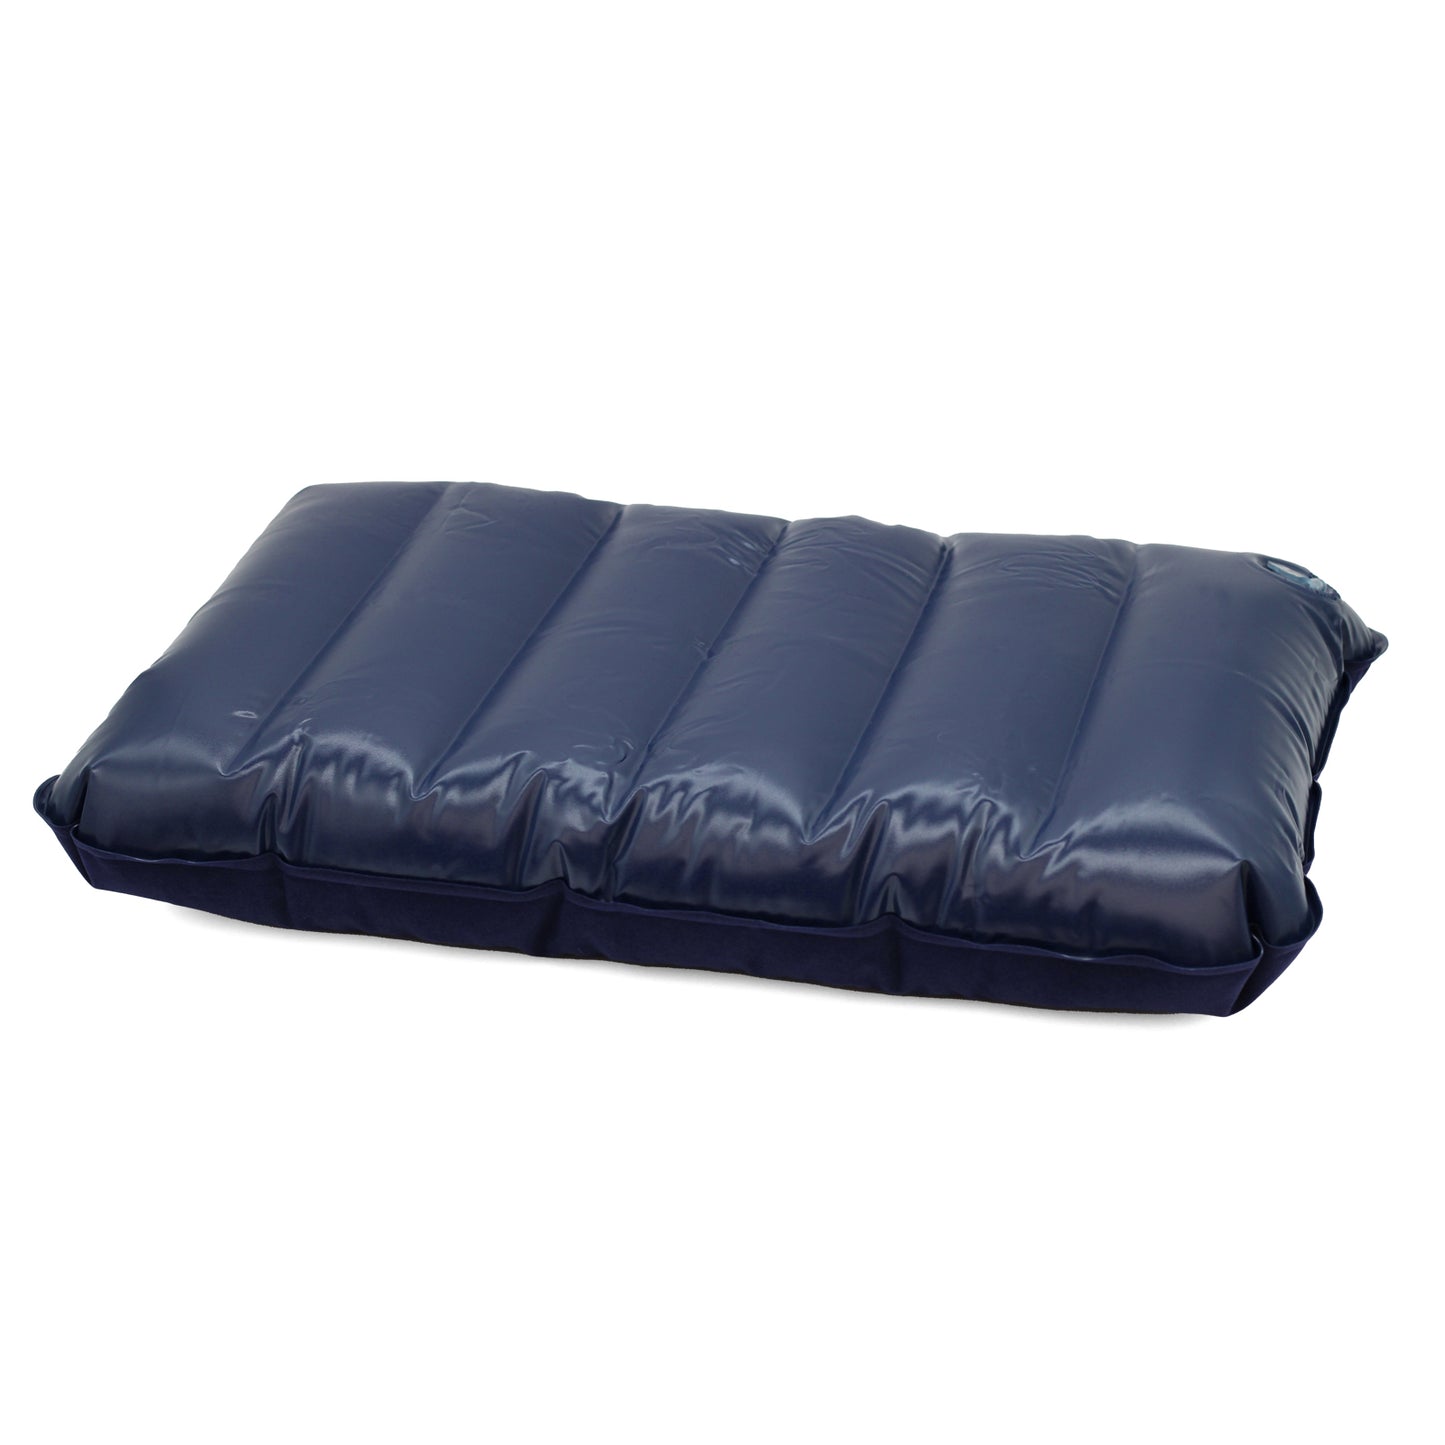 Inflatable Pillow Underneath